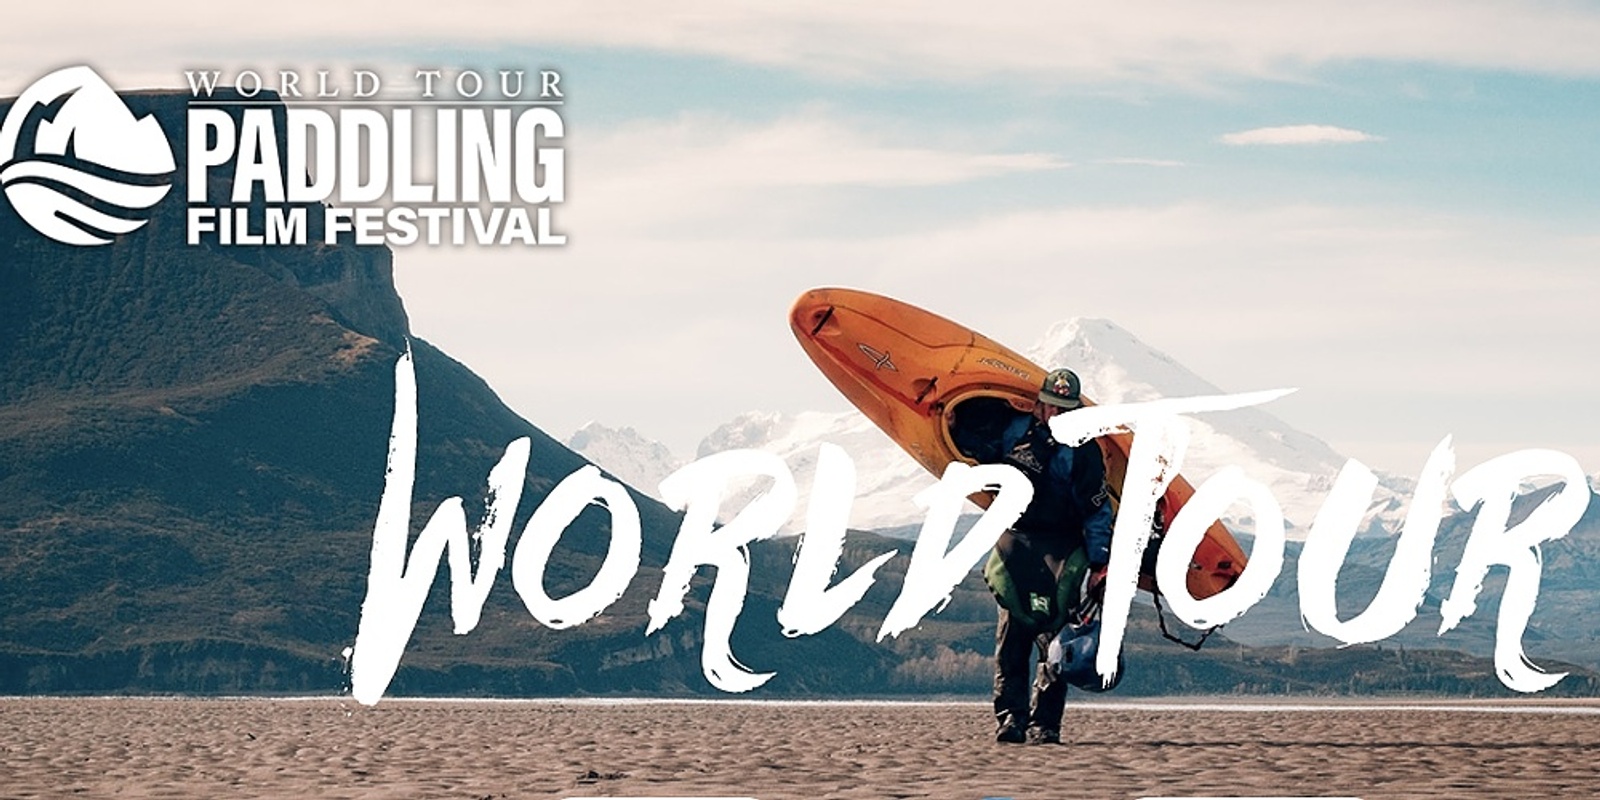 Banner image for Paddling Film Festival World Tour at Further Faster & Long Cloud Kayaks